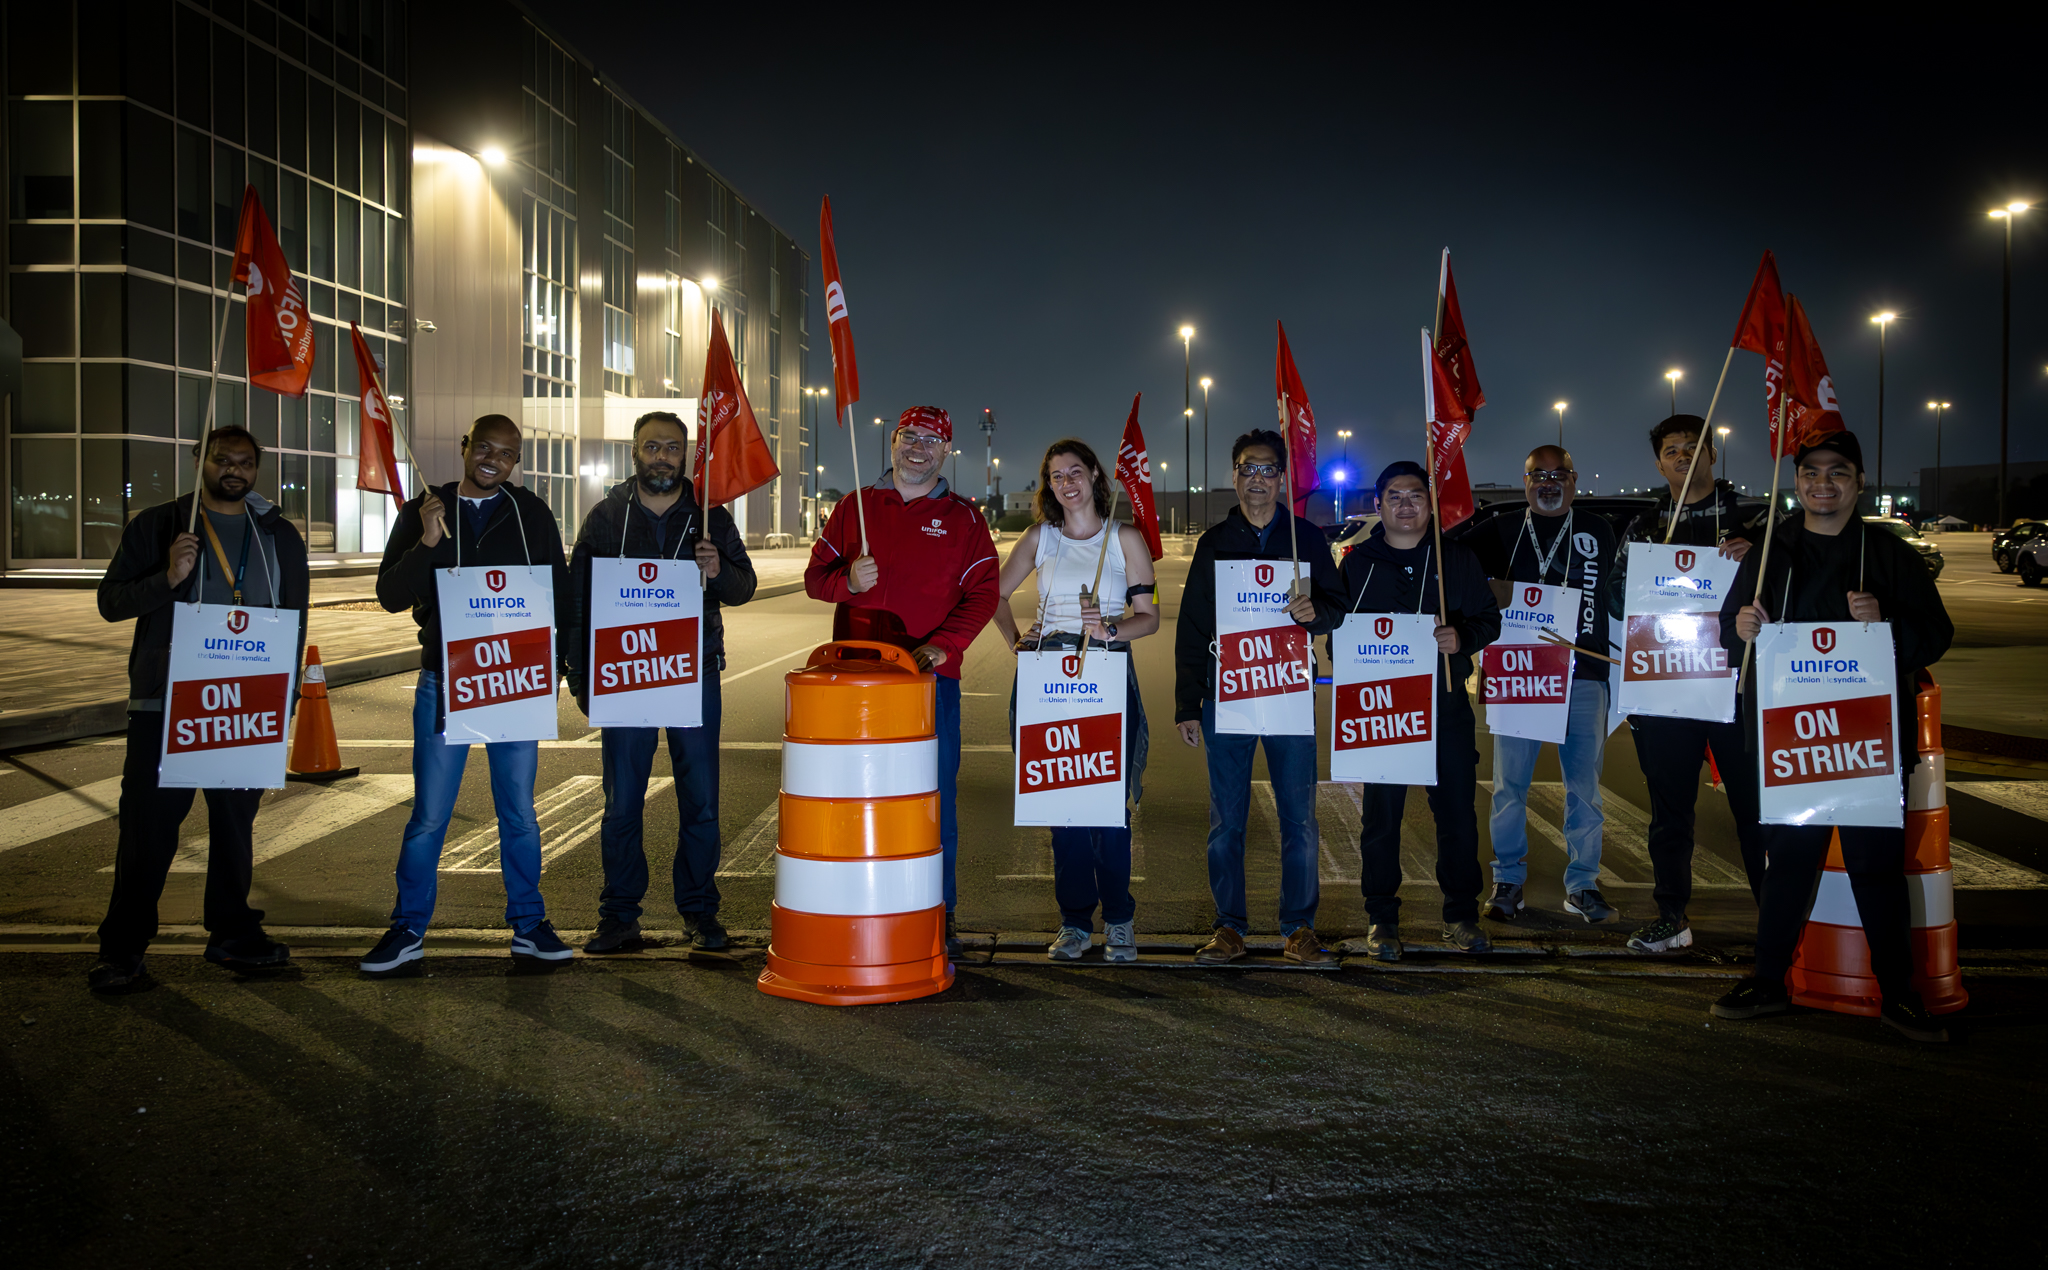 A group of Unifor members standing on the picket line wearing "on strike" signs and holding Unifor flags on the Bombardier picket lineholdin